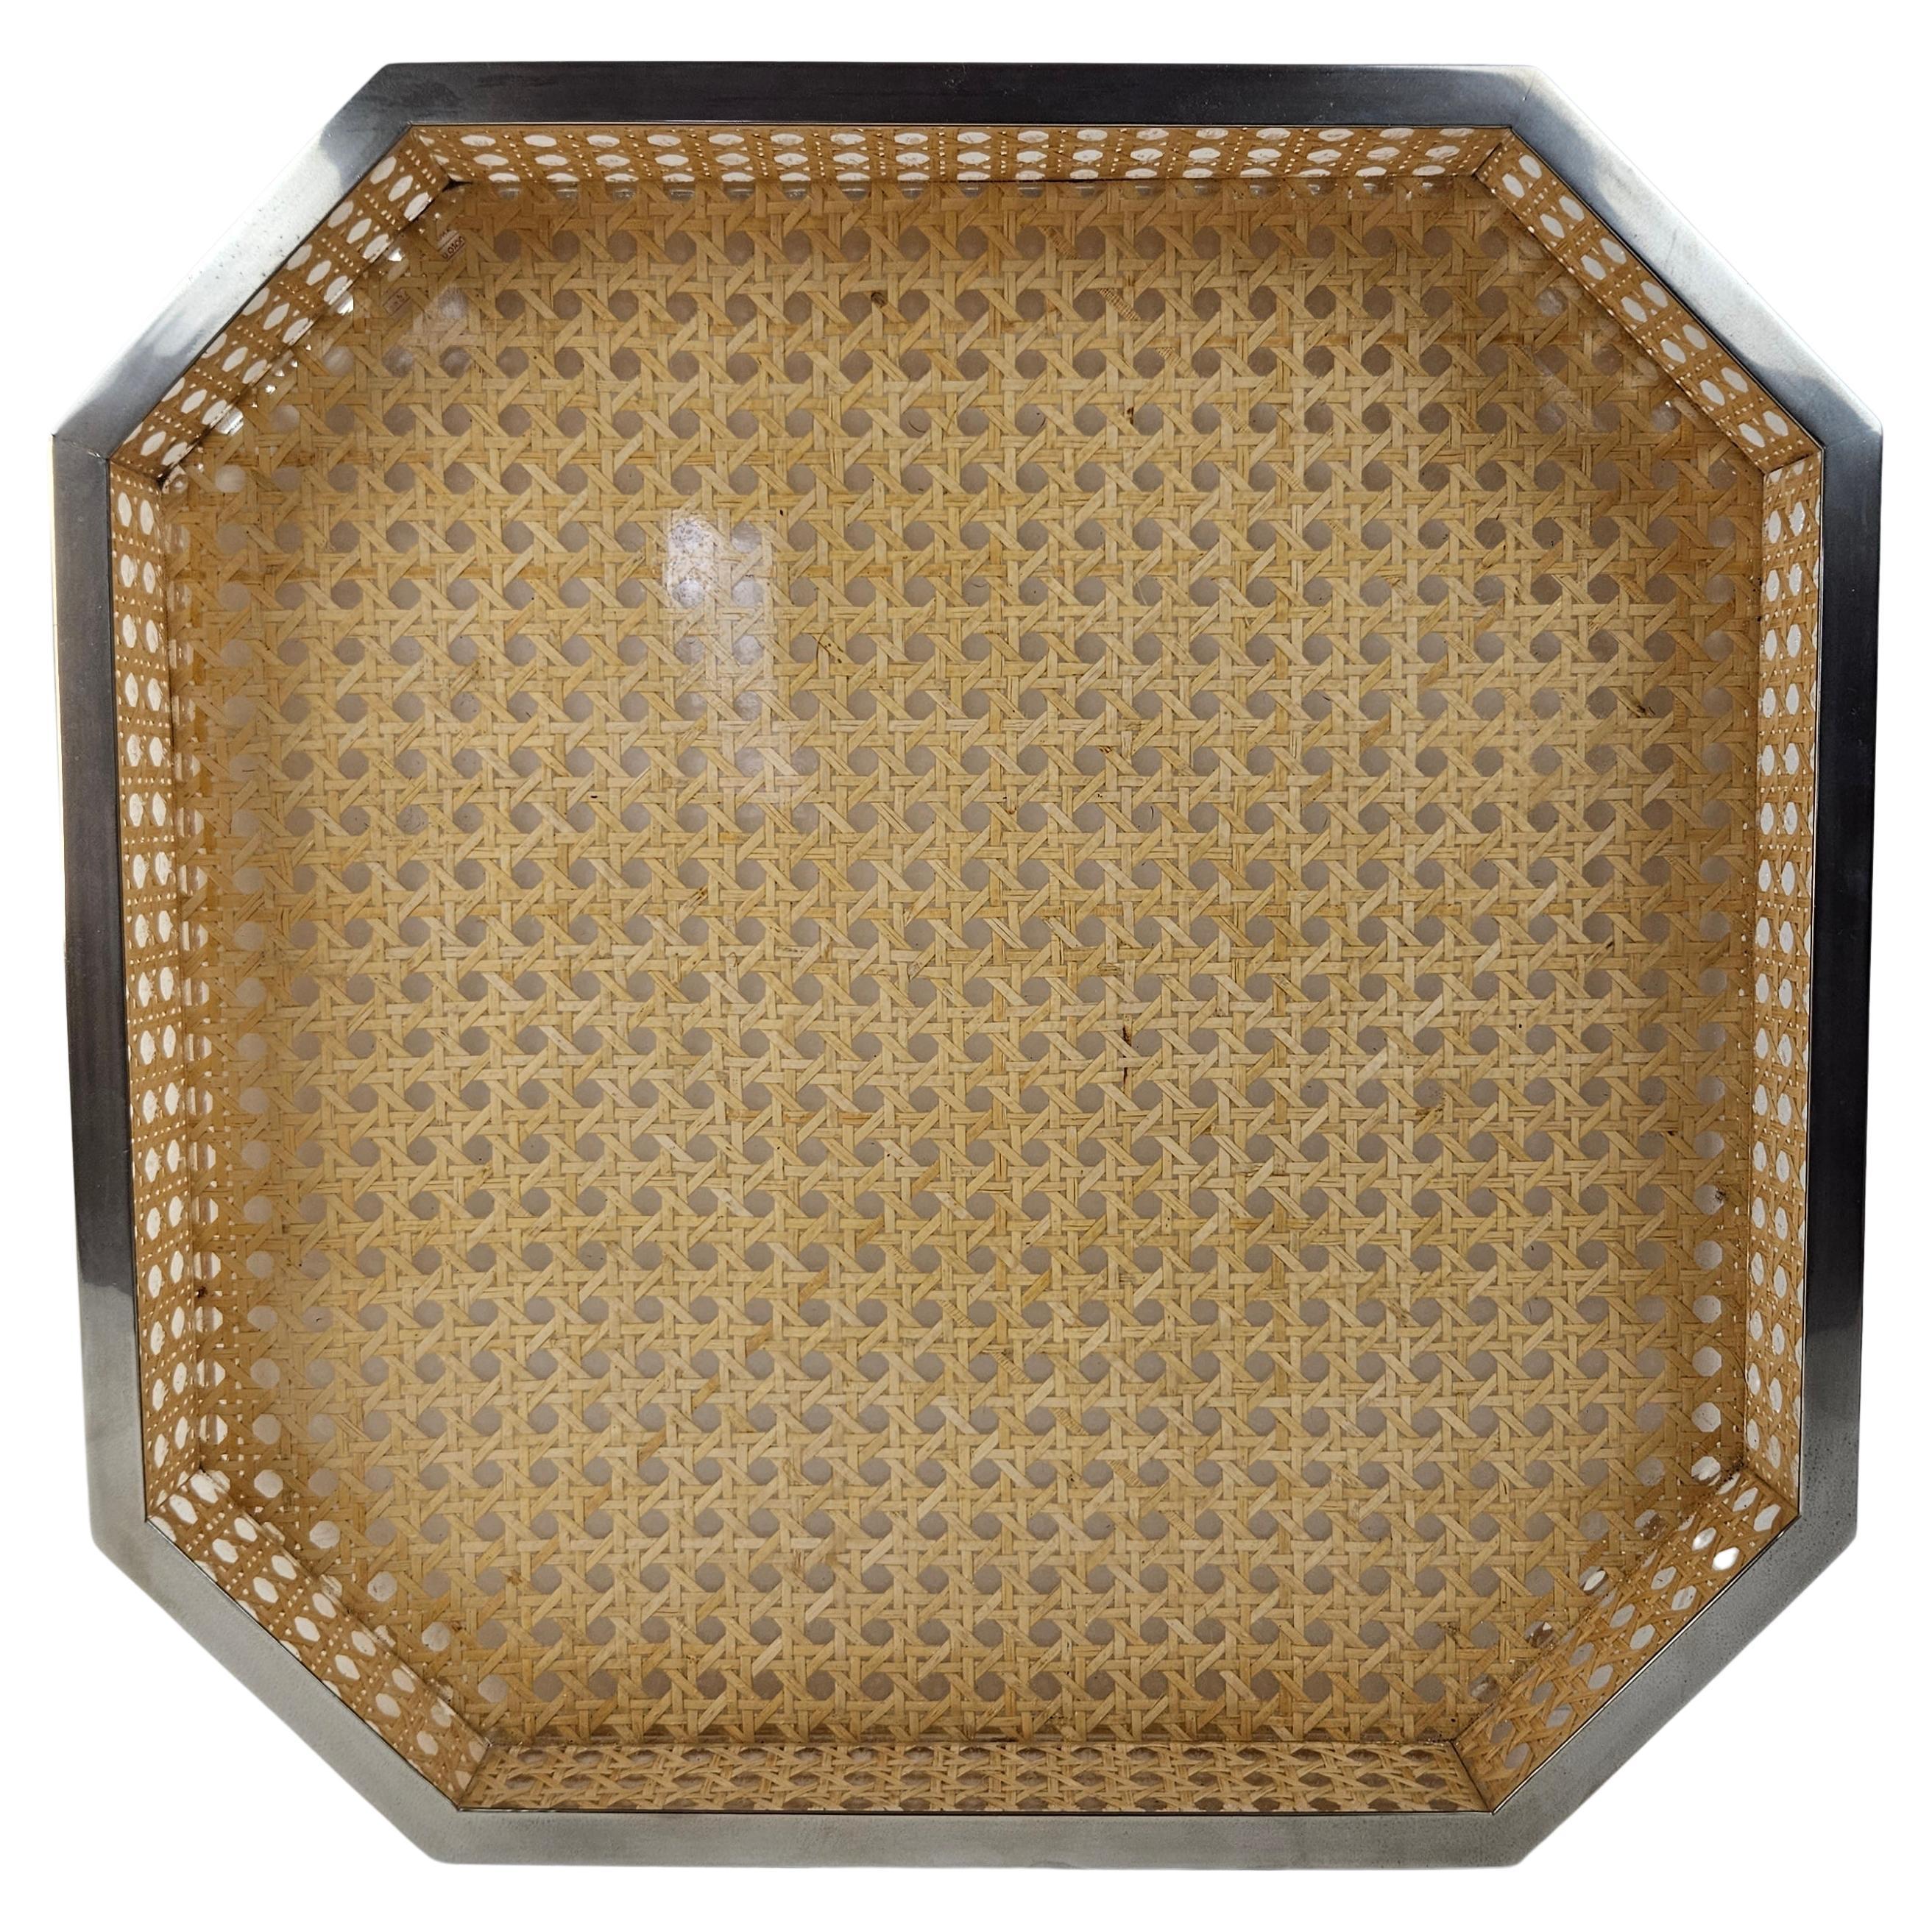 Serving Tray in Lucite, Rattan and 24k Gold, Italy 1970s